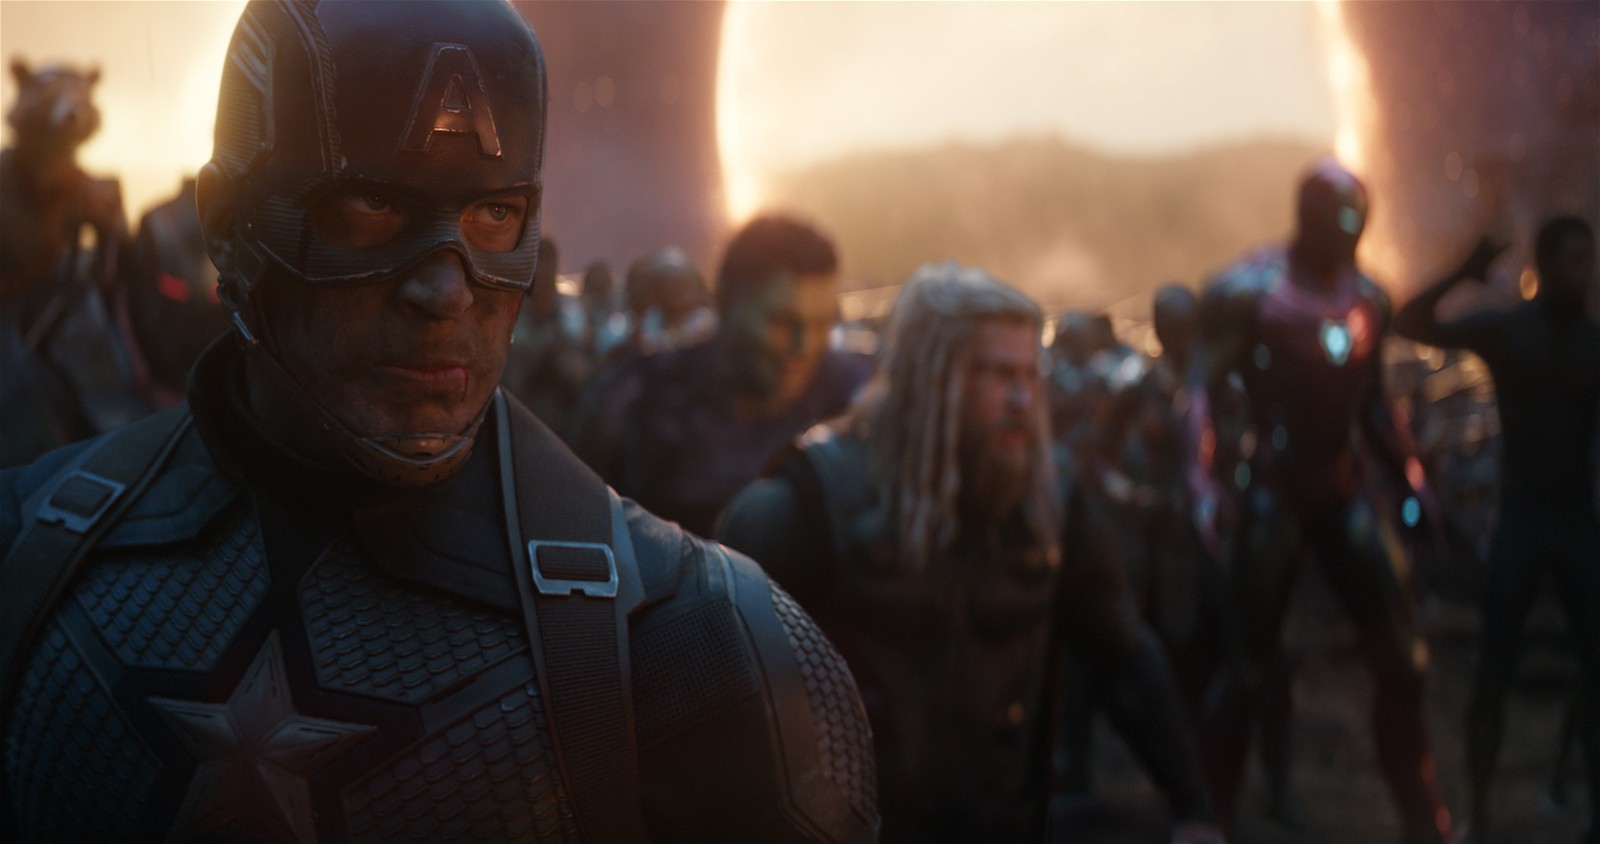 Avnegers 5 and 6 will be much bigger in scope and nu,ber of characters than Avengers : Endgame | Marvel Studios